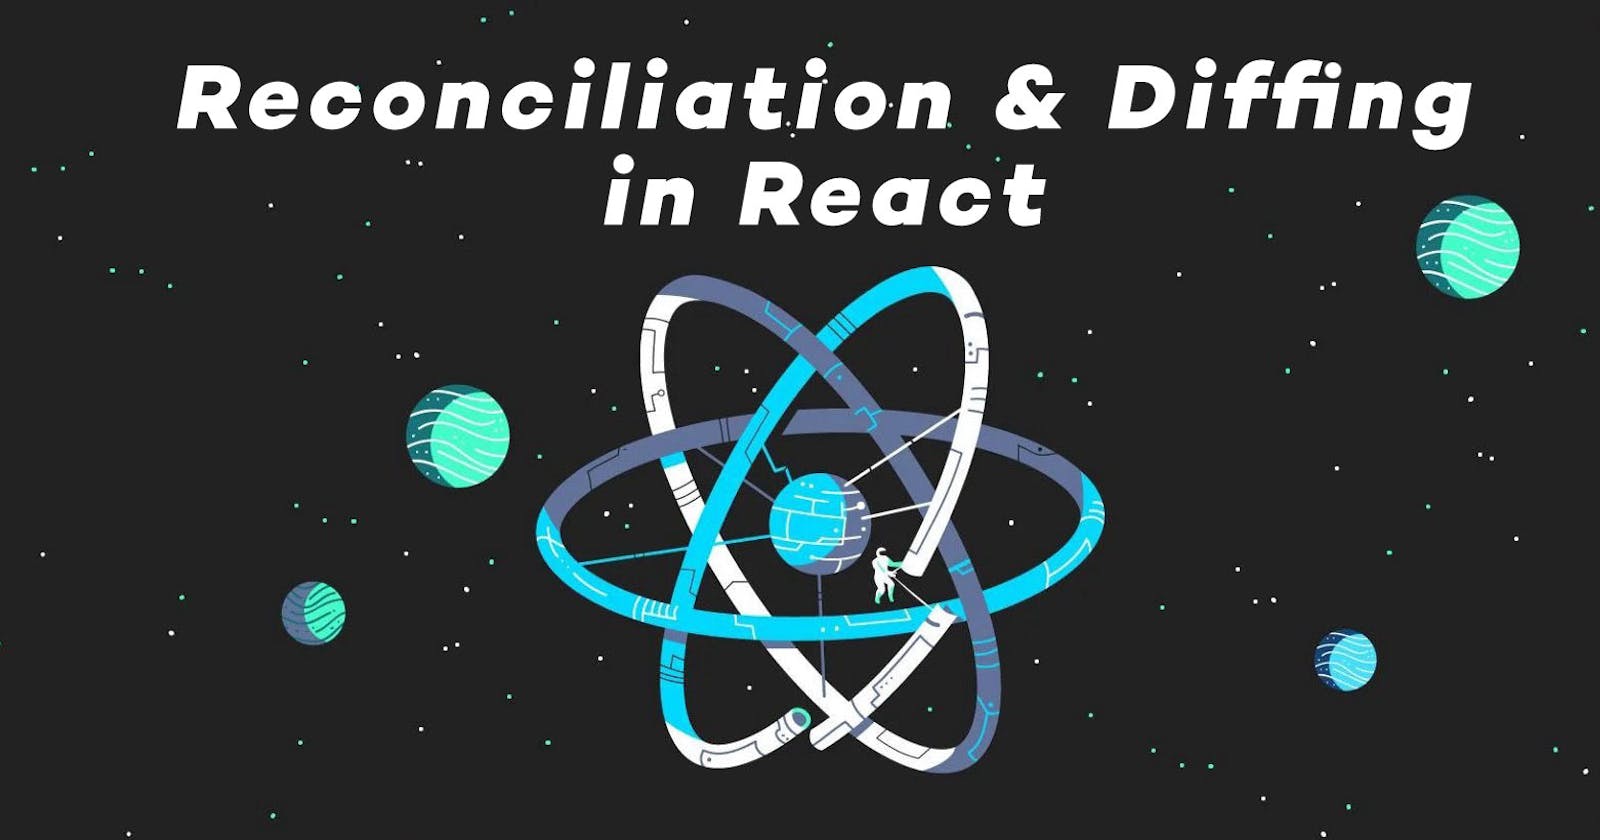 Reconciliation & Diffing in React ✨